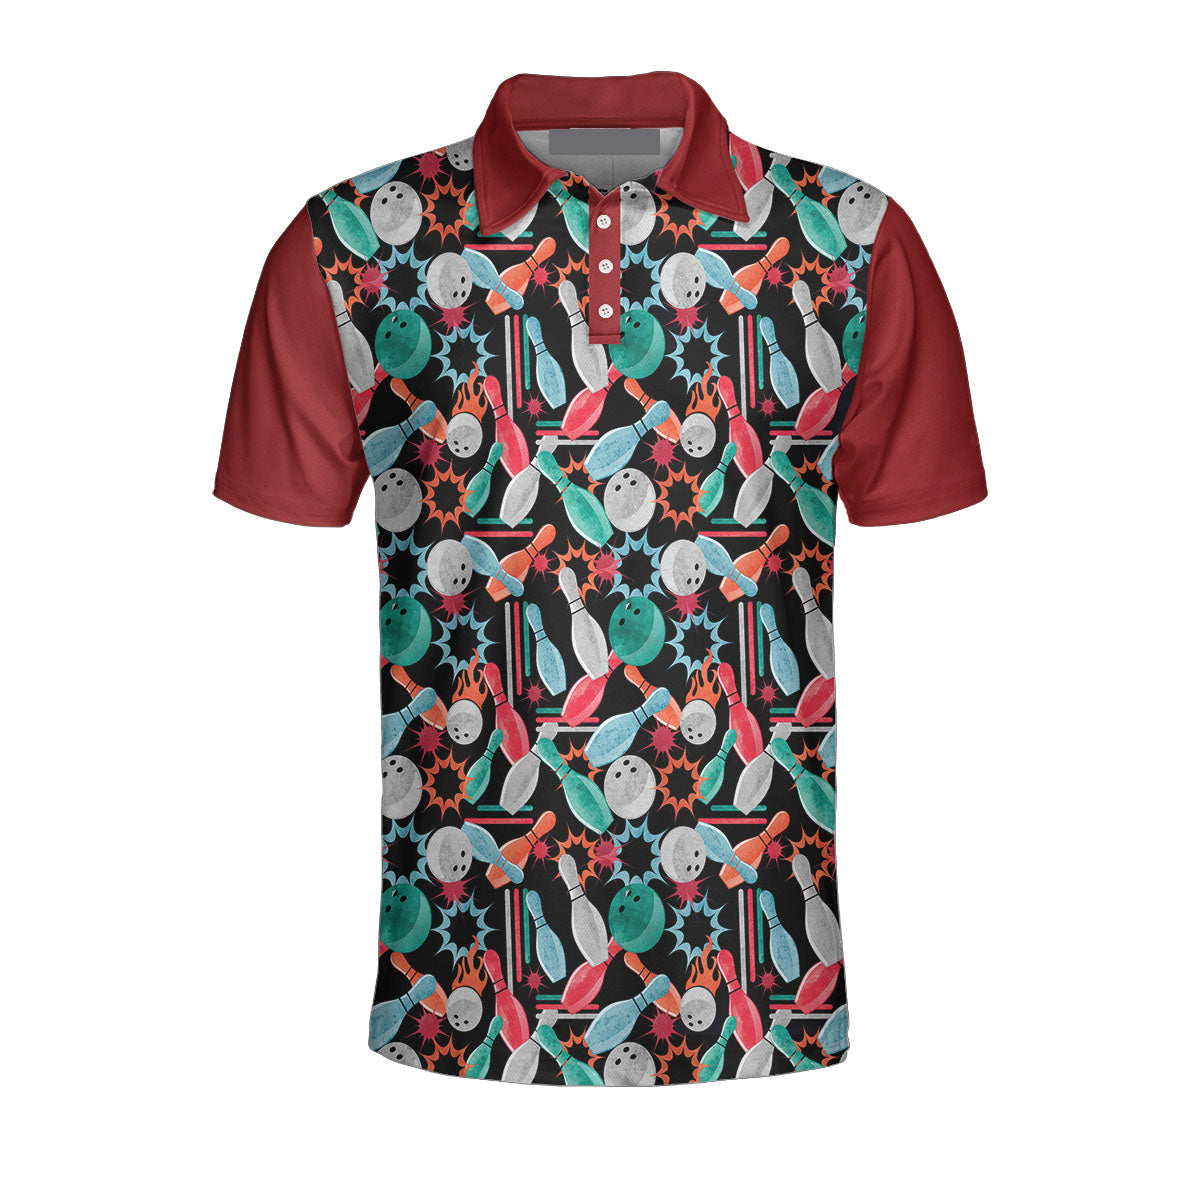 Sleep With A Bowler You'Ll Be Amazed Colorful Tenpin Bowling Design Polo Shirt